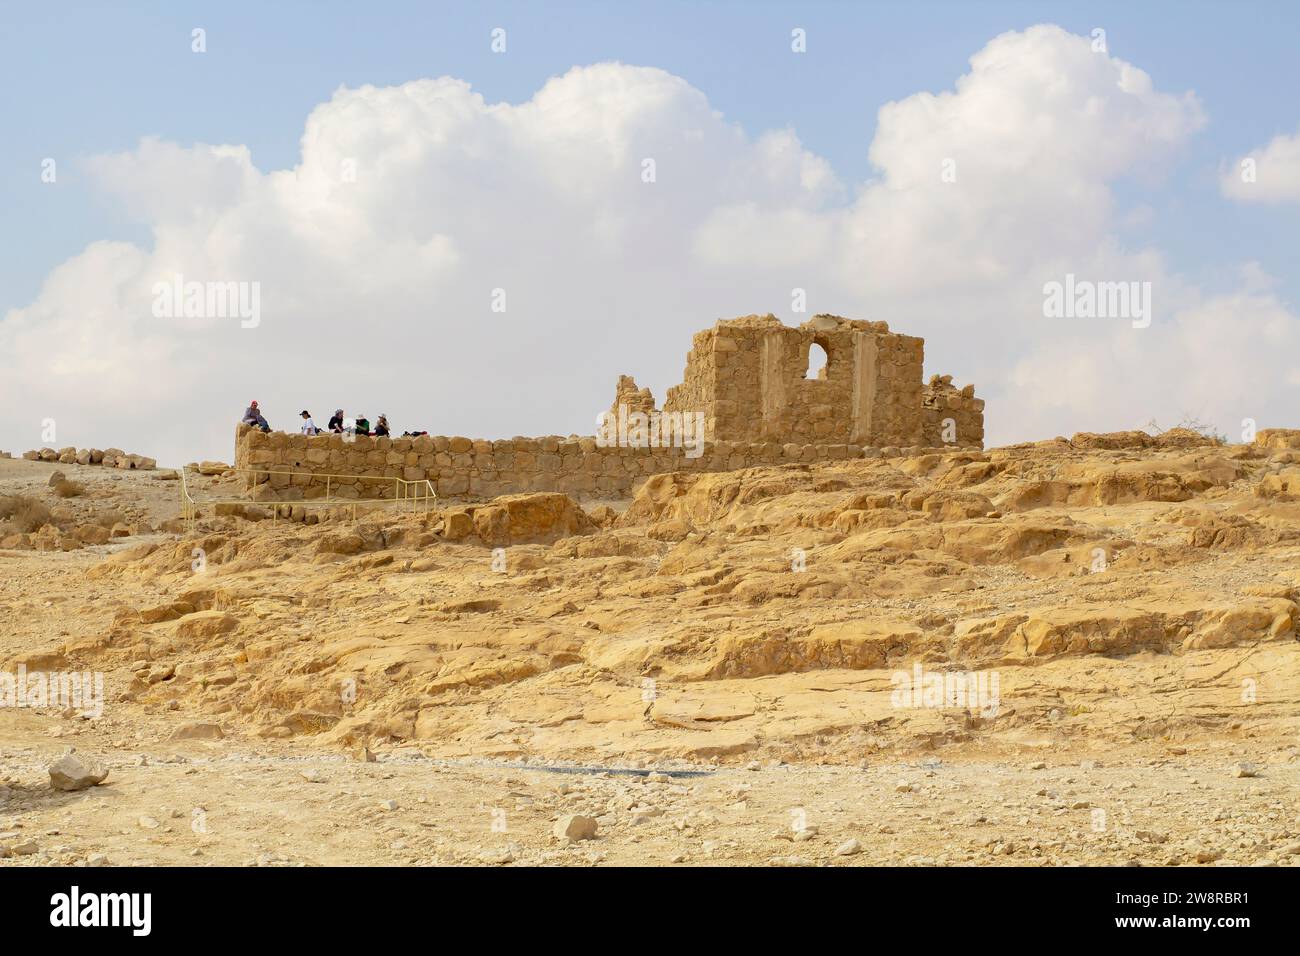 November 2022, Tourists visit the ancient ruins at Massada, built by Herod the Great, and the ancient site of Jewish revolt against the Roman occupati Stock Photo